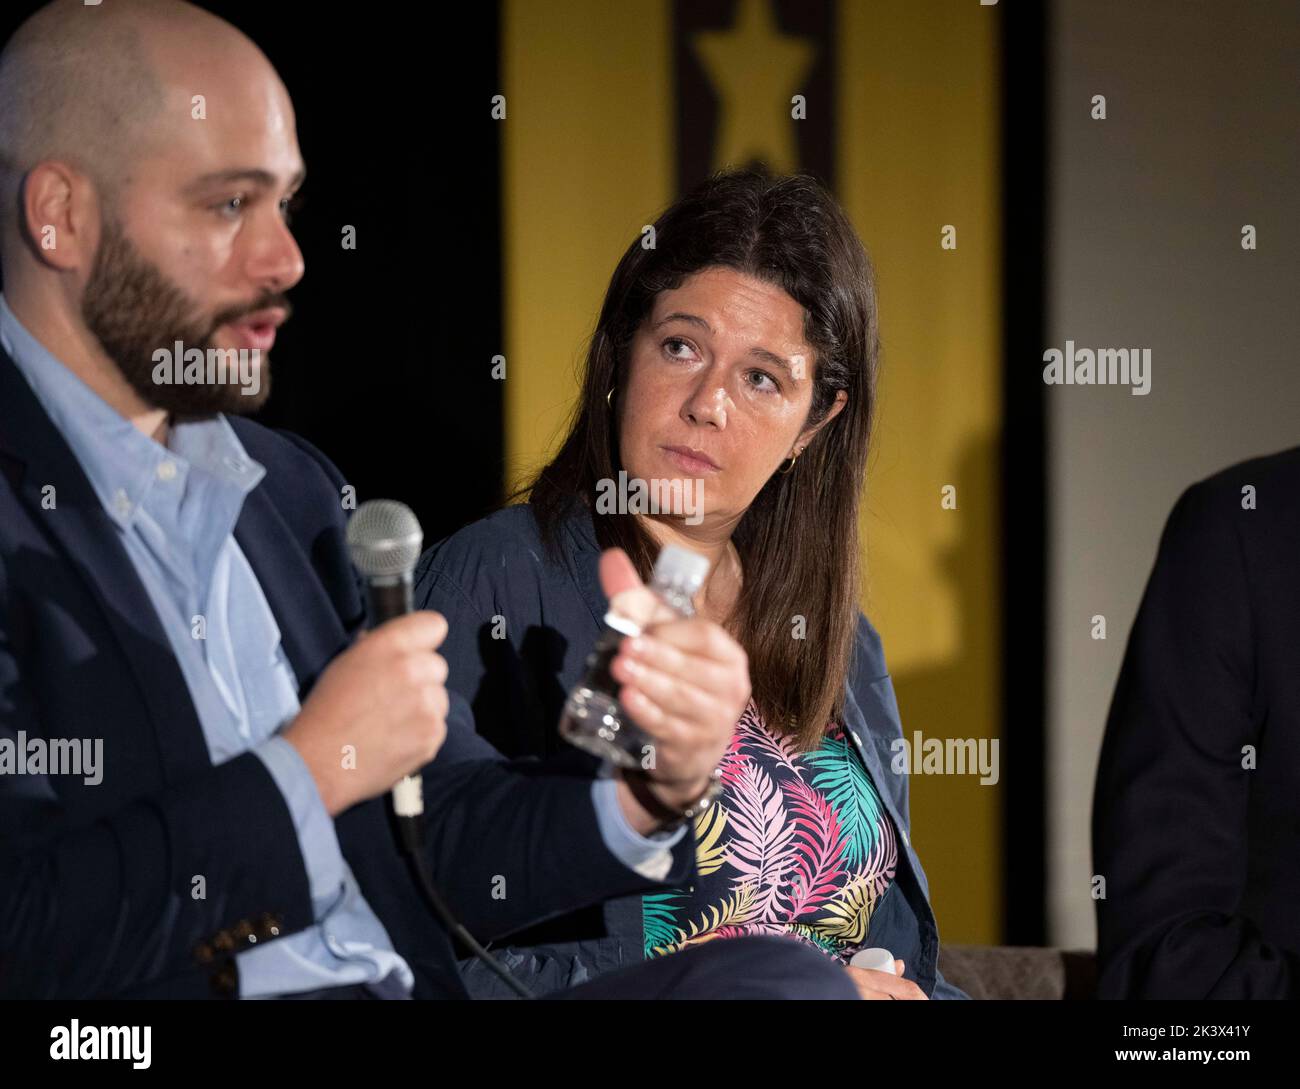 Senior national political correspondent for the Washington Post ASHLEY PARKER speaks during an interview session at the annual Texas Tribune Festival in downtown Austin on September 24, 2022. At left is New York Magazine writer GABRIEL DEBENEDETTI Stock Photo